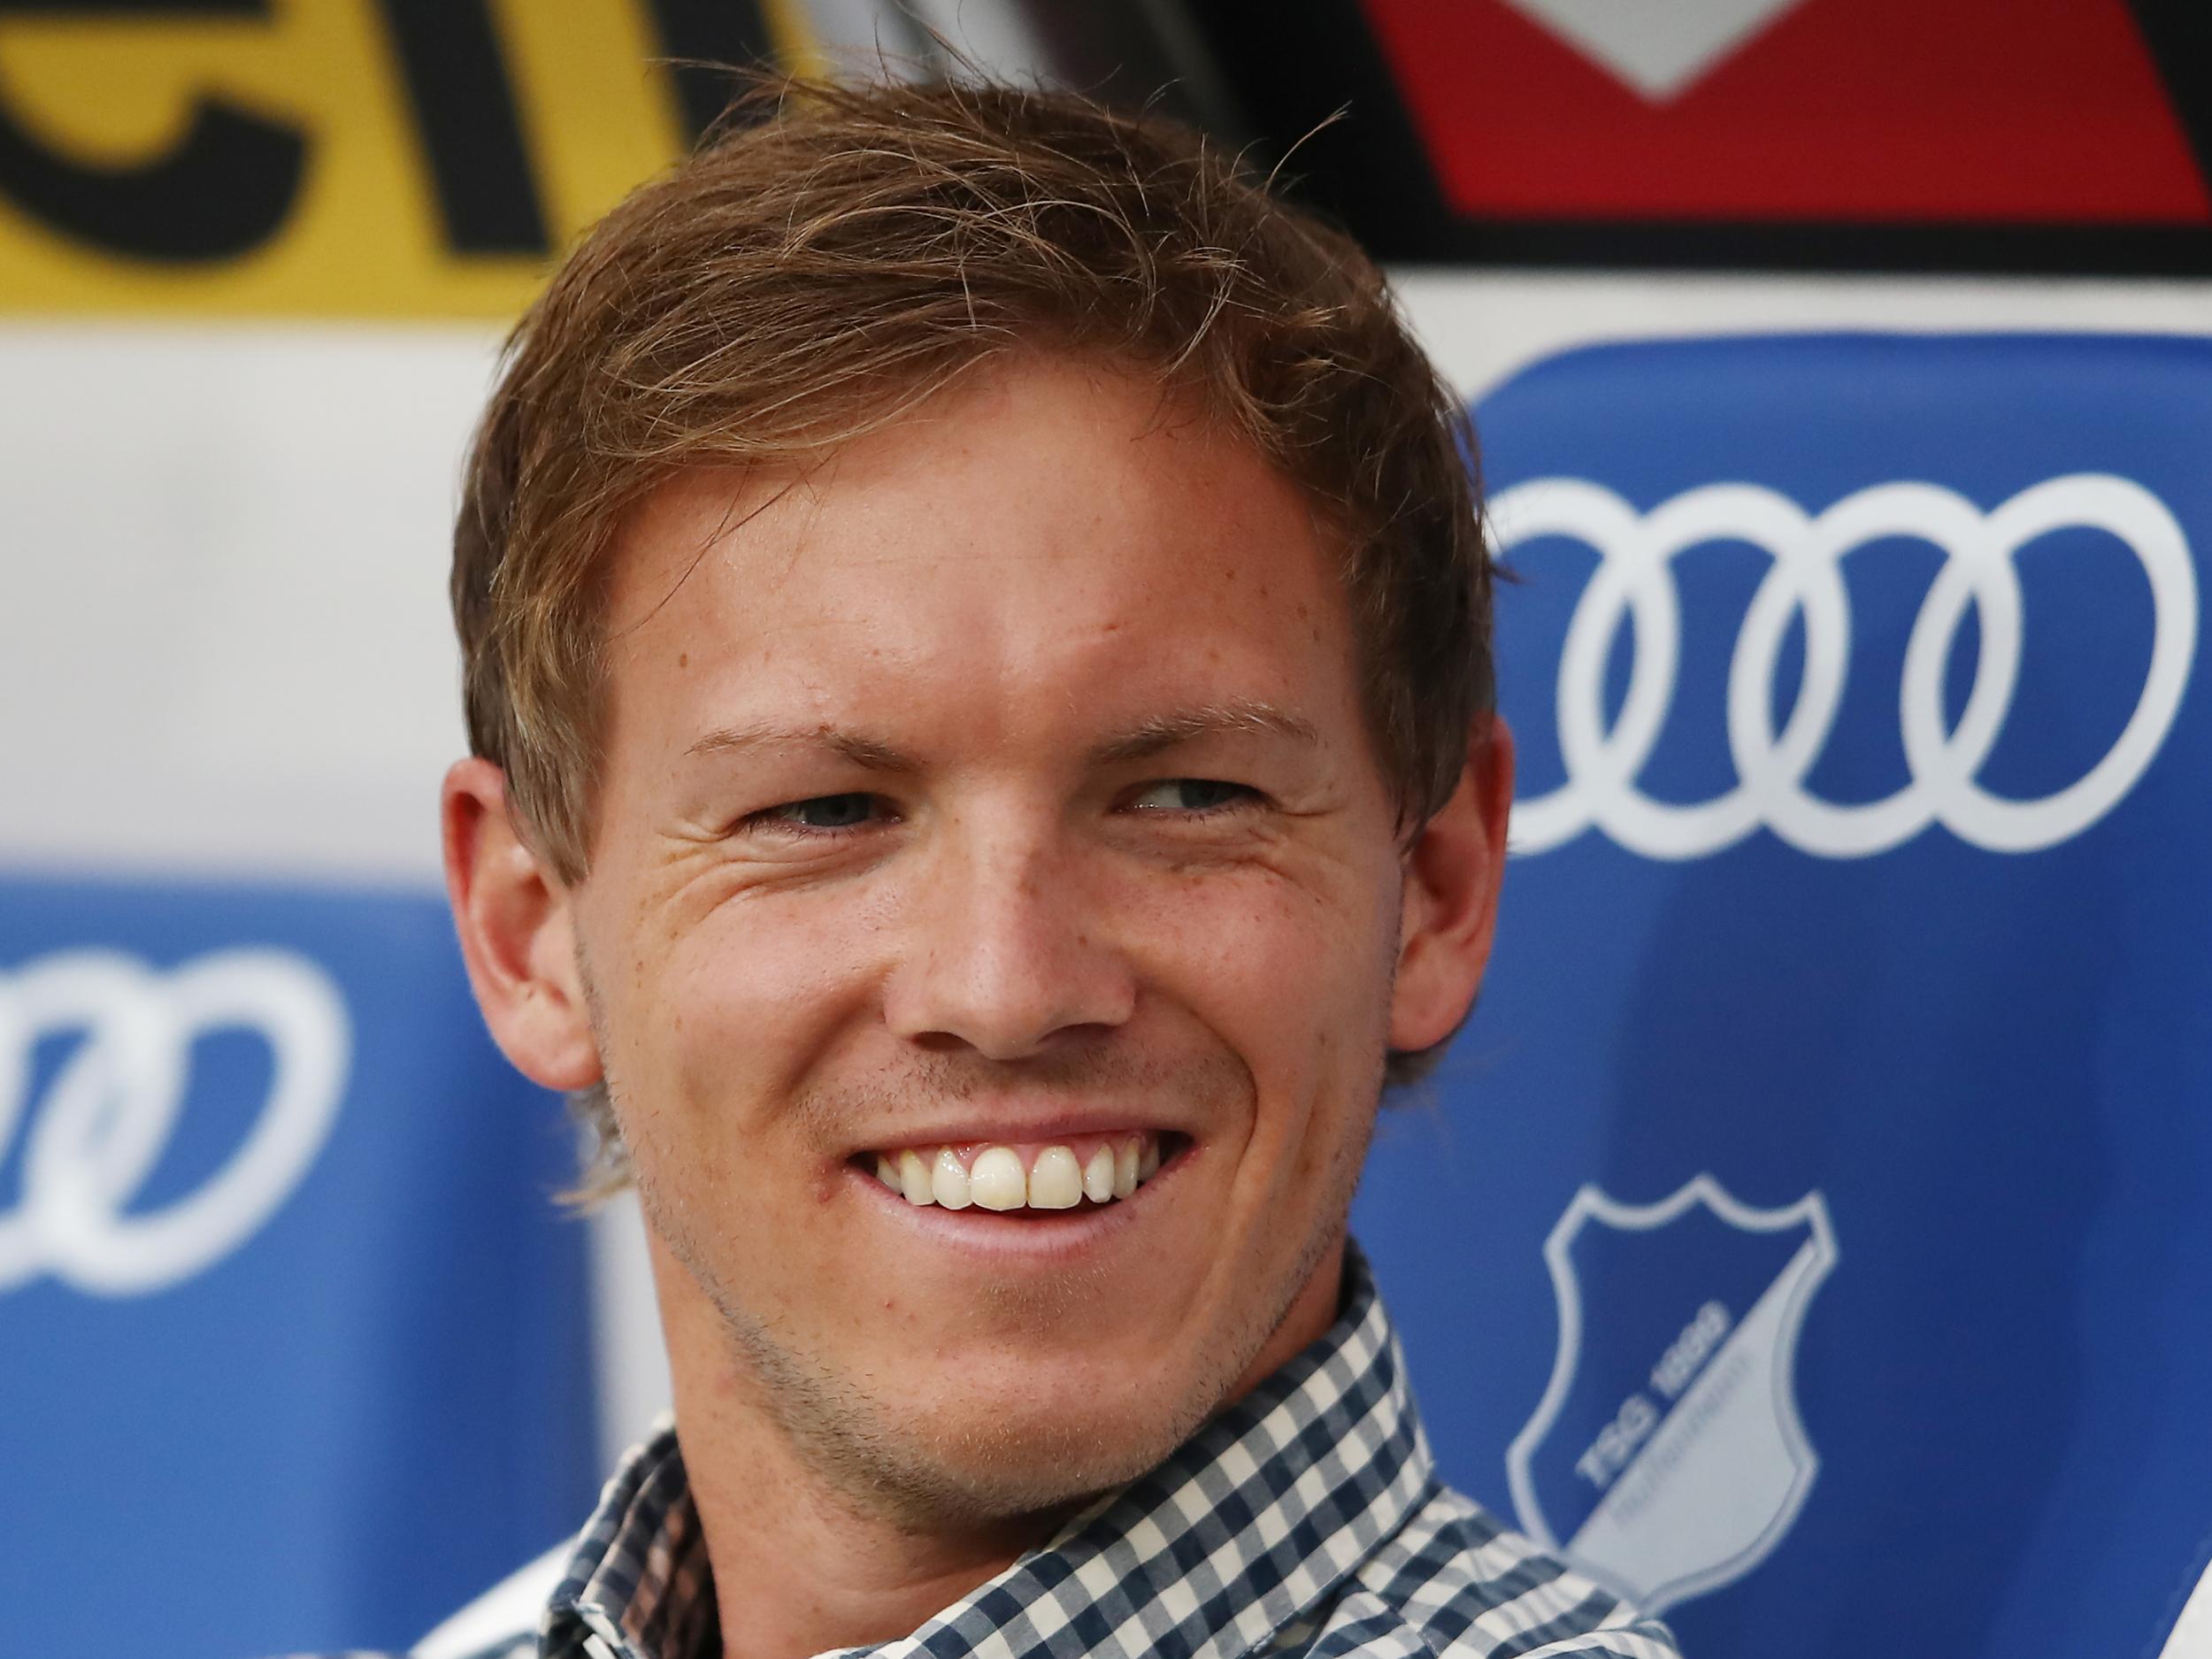 Julian Nagelsmann has been a successful young coach in the Bundesliga